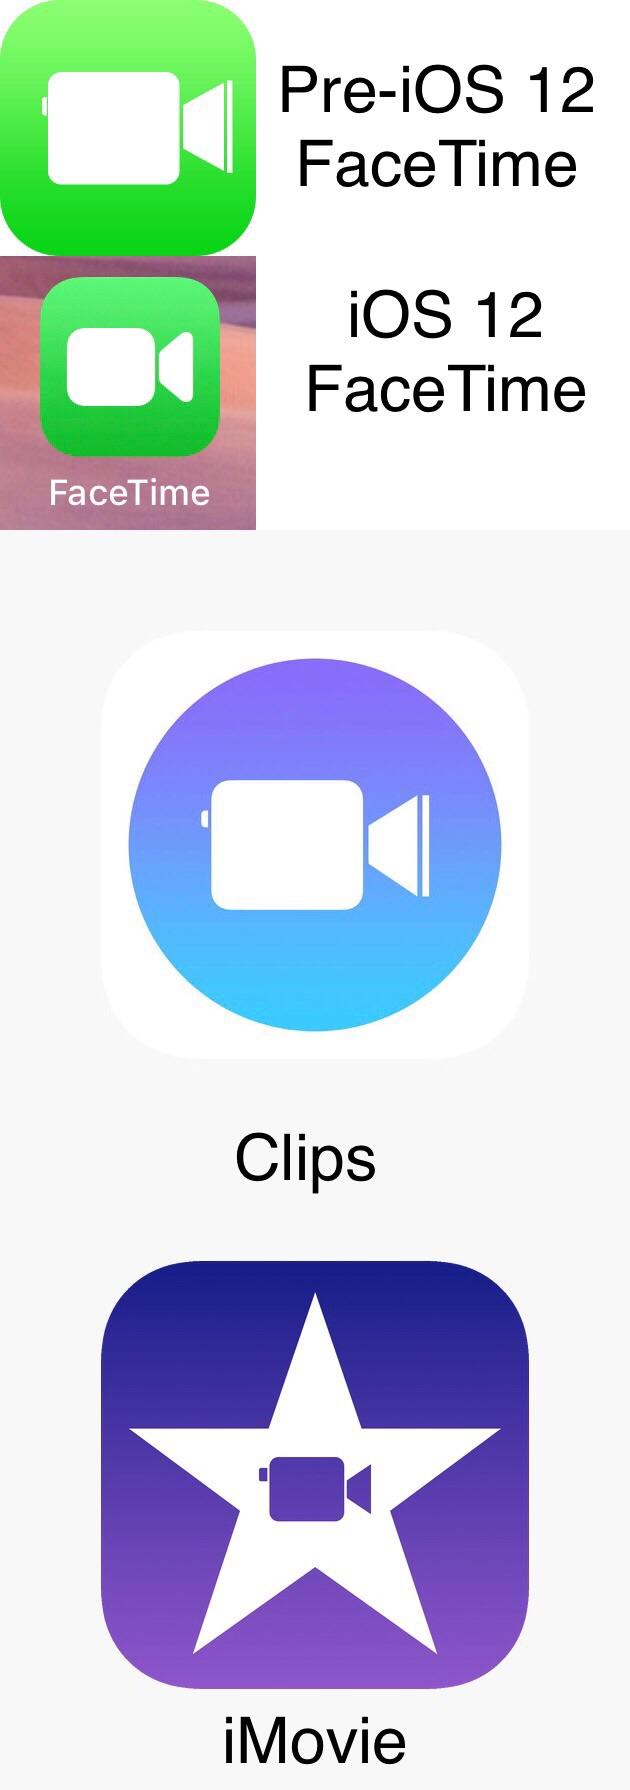 FaceTime App Logo - Request] Apple updated the FaceTime app icon with iOS 12, but kept ...